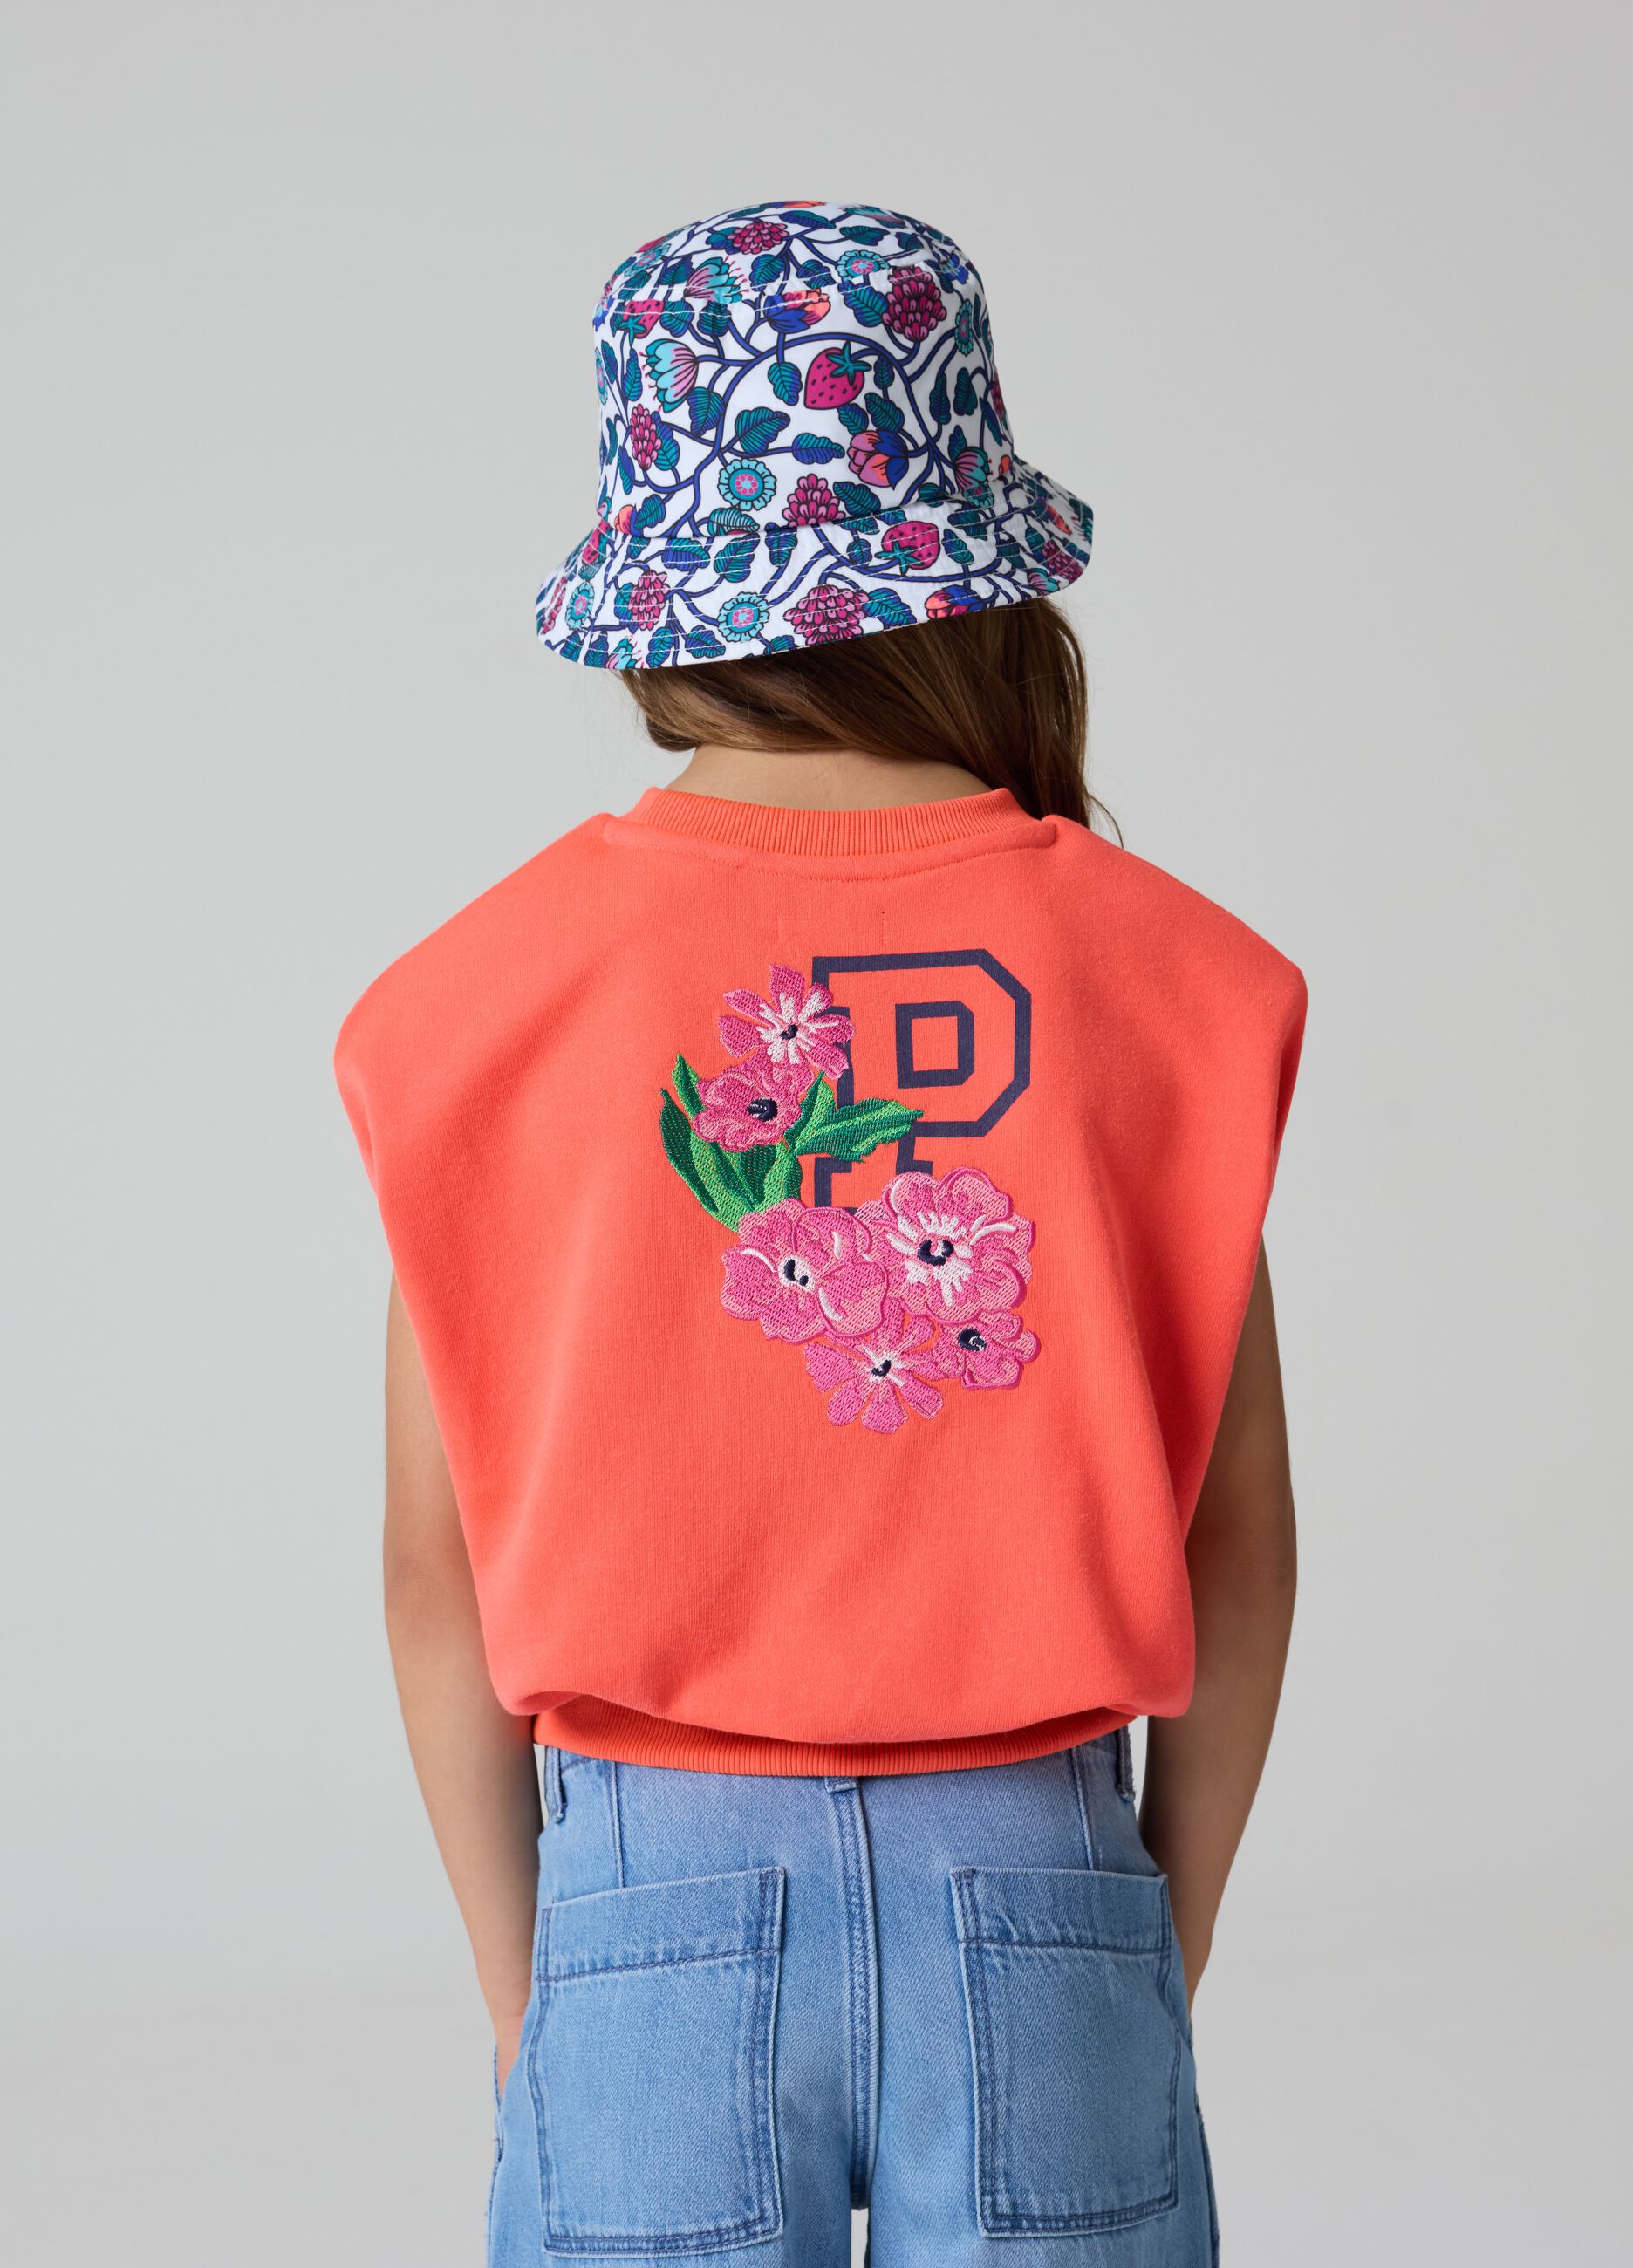 Sleeveless sweatshirt with floral embroidery